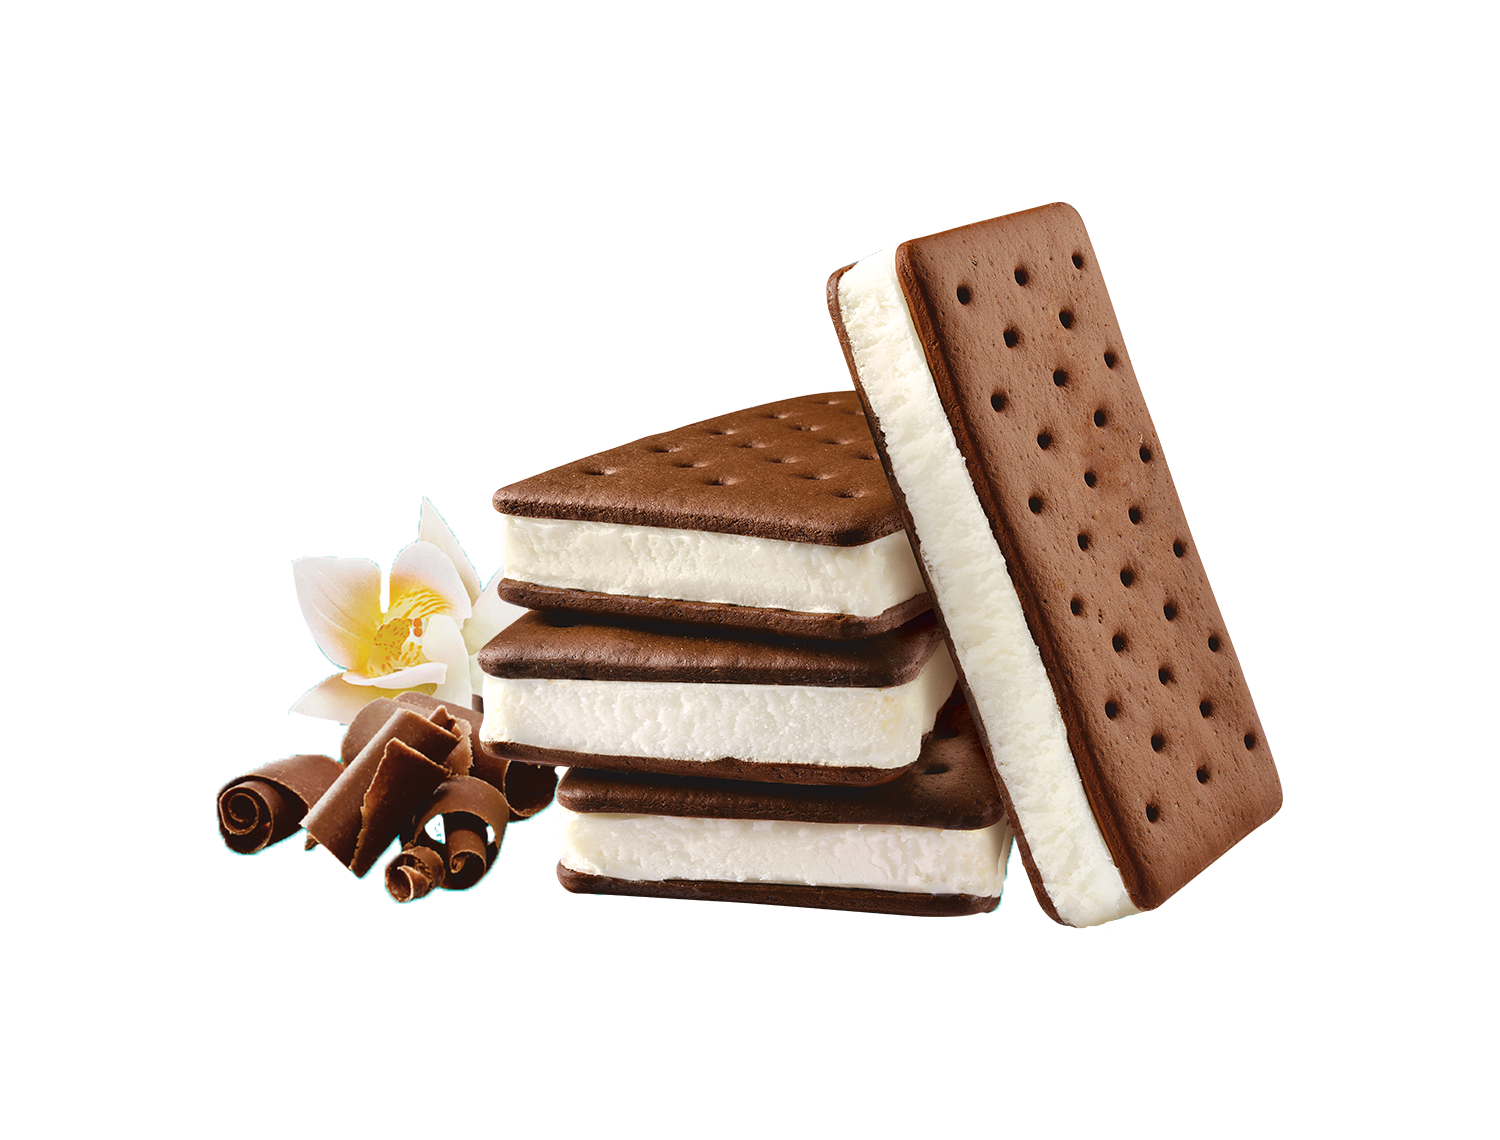 skinny cow mini vanilla ice cream sandwich with flower and chocolate curls on the side